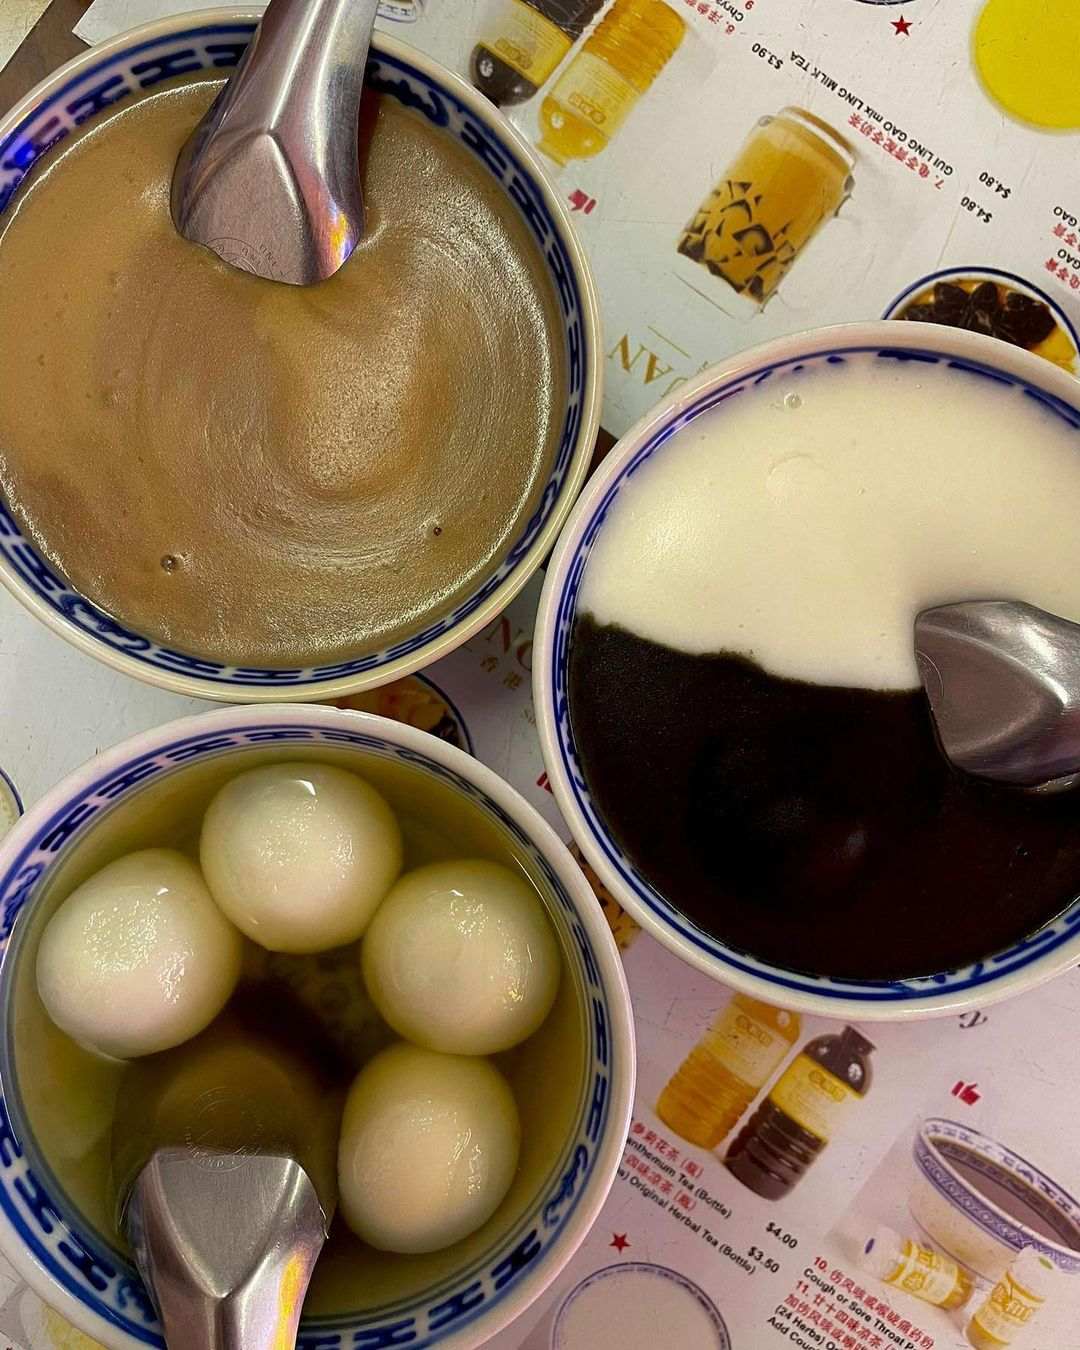 late-night dessert places gong he guan